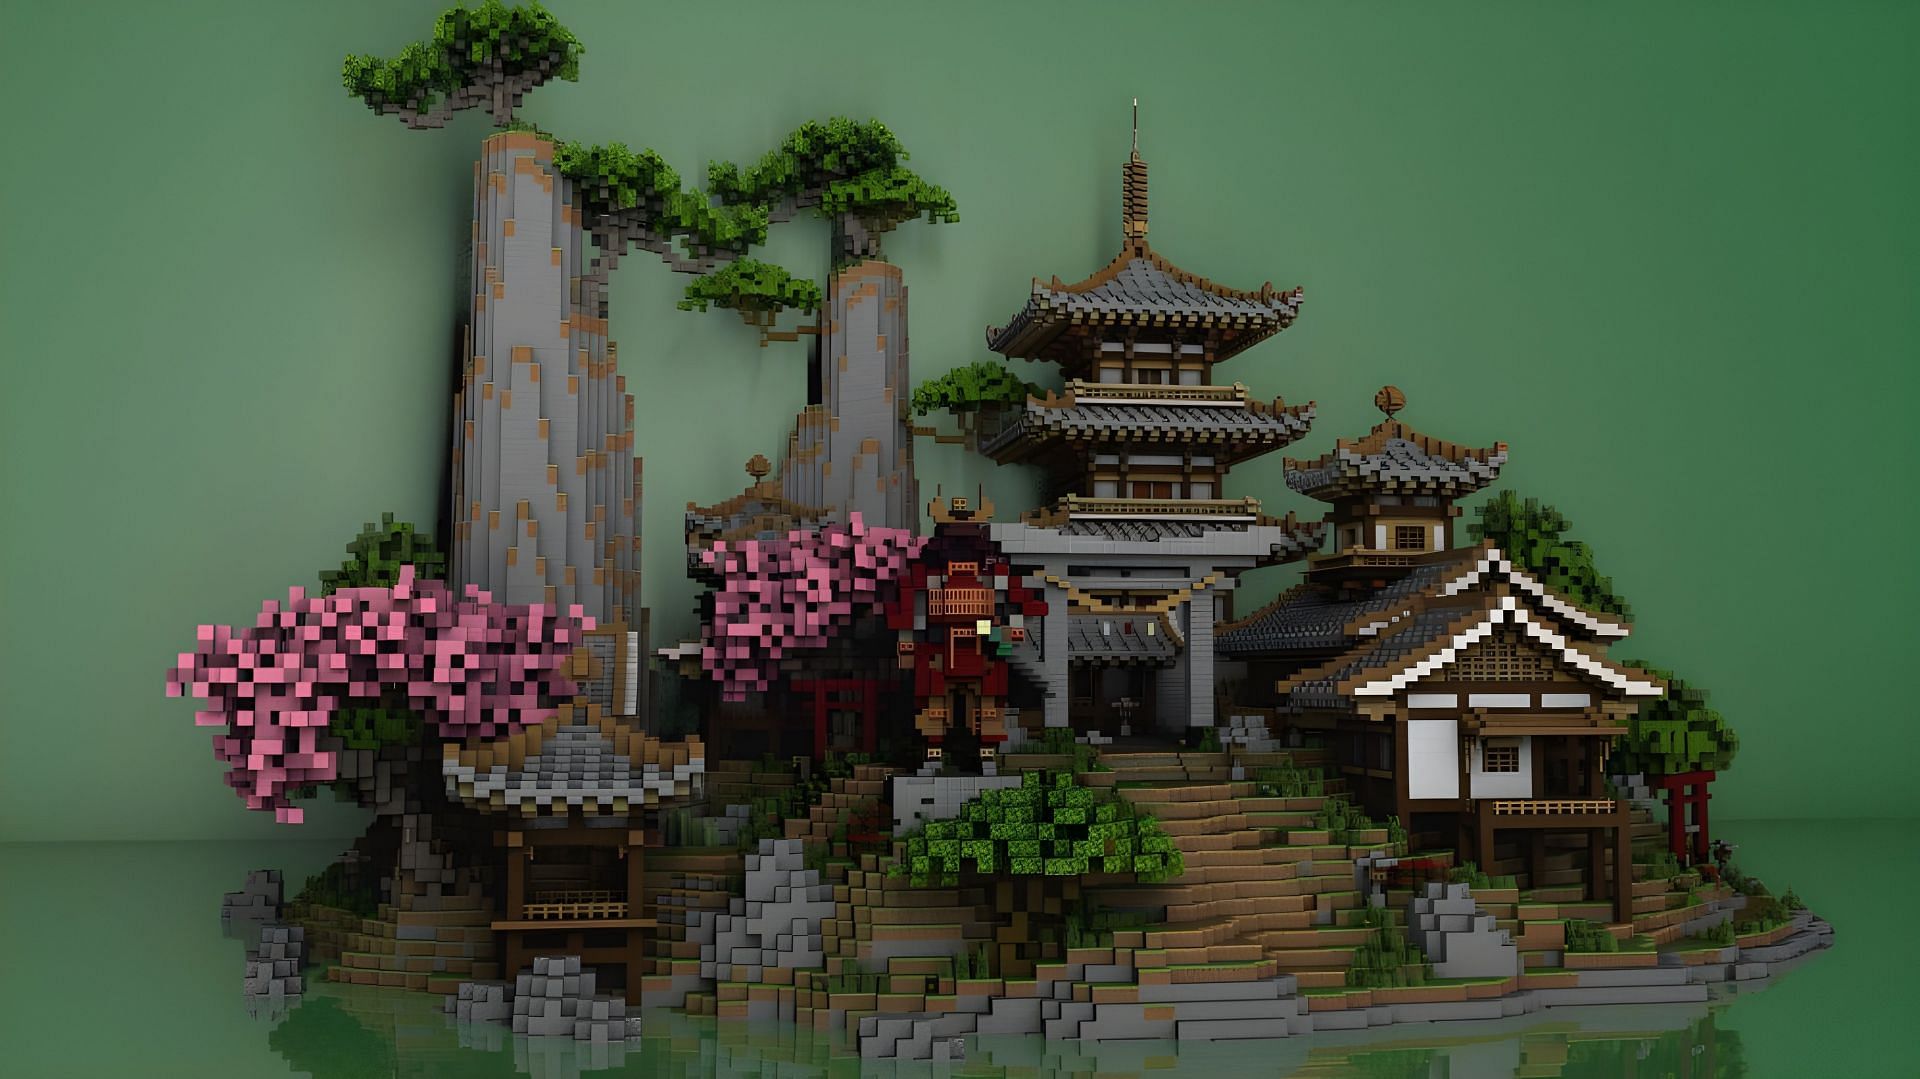 Minecraft Japan inspired builds are some of the most popular (Image via Twitter/Sugar85006287)